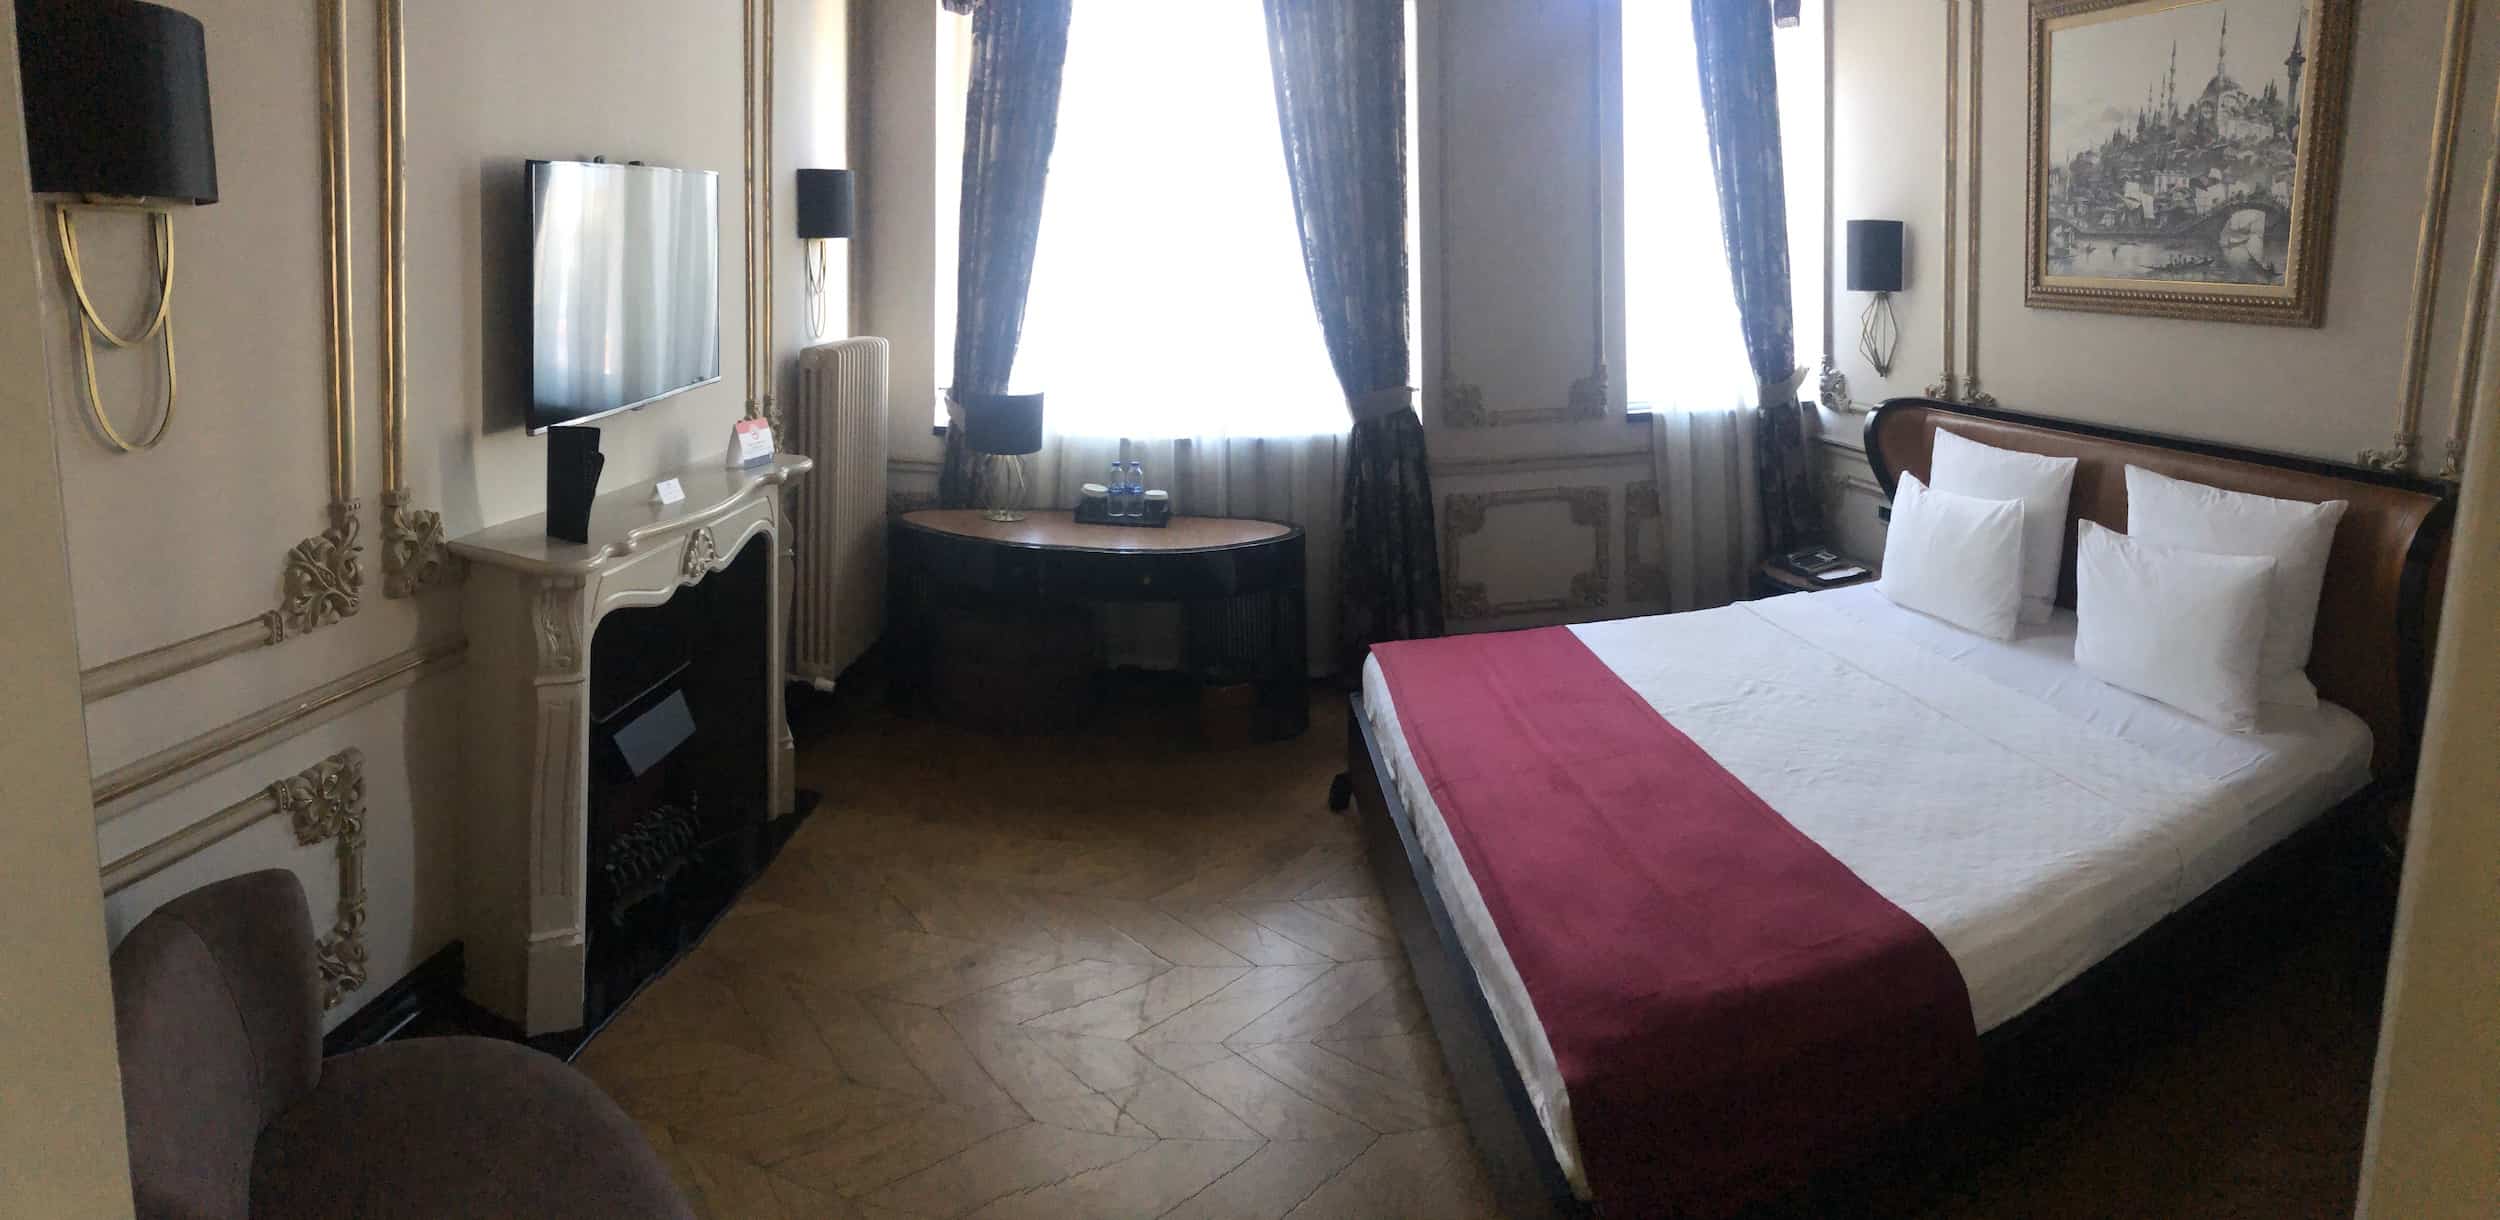 My room at the Nordstern Hotel in Istanbul, Turkey